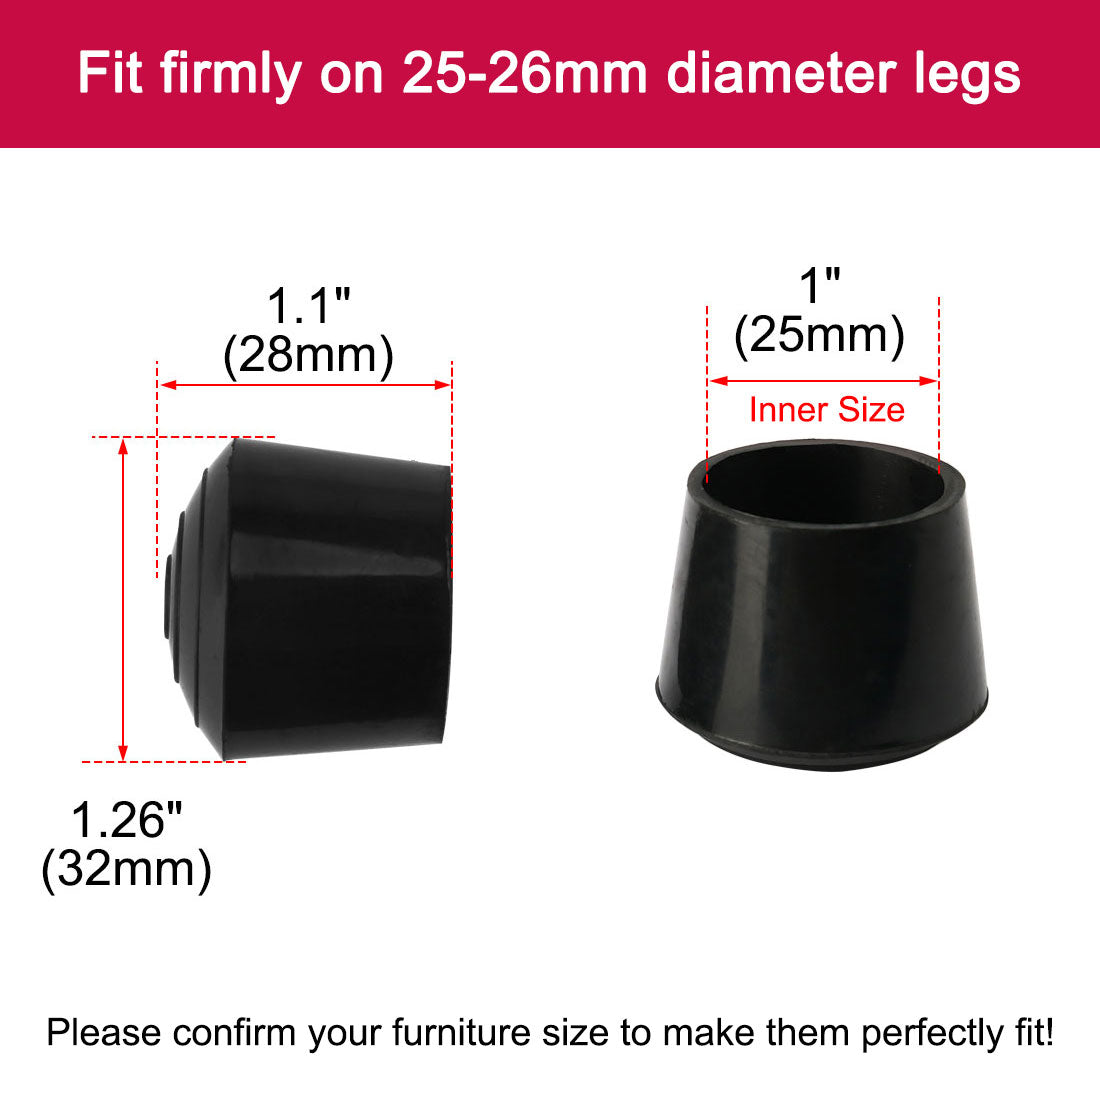 uxcell Uxcell Rubber Leg Cap Tip Cup Feet Cover 25mm 1" Inner Dia 24pcs for Furniture Table